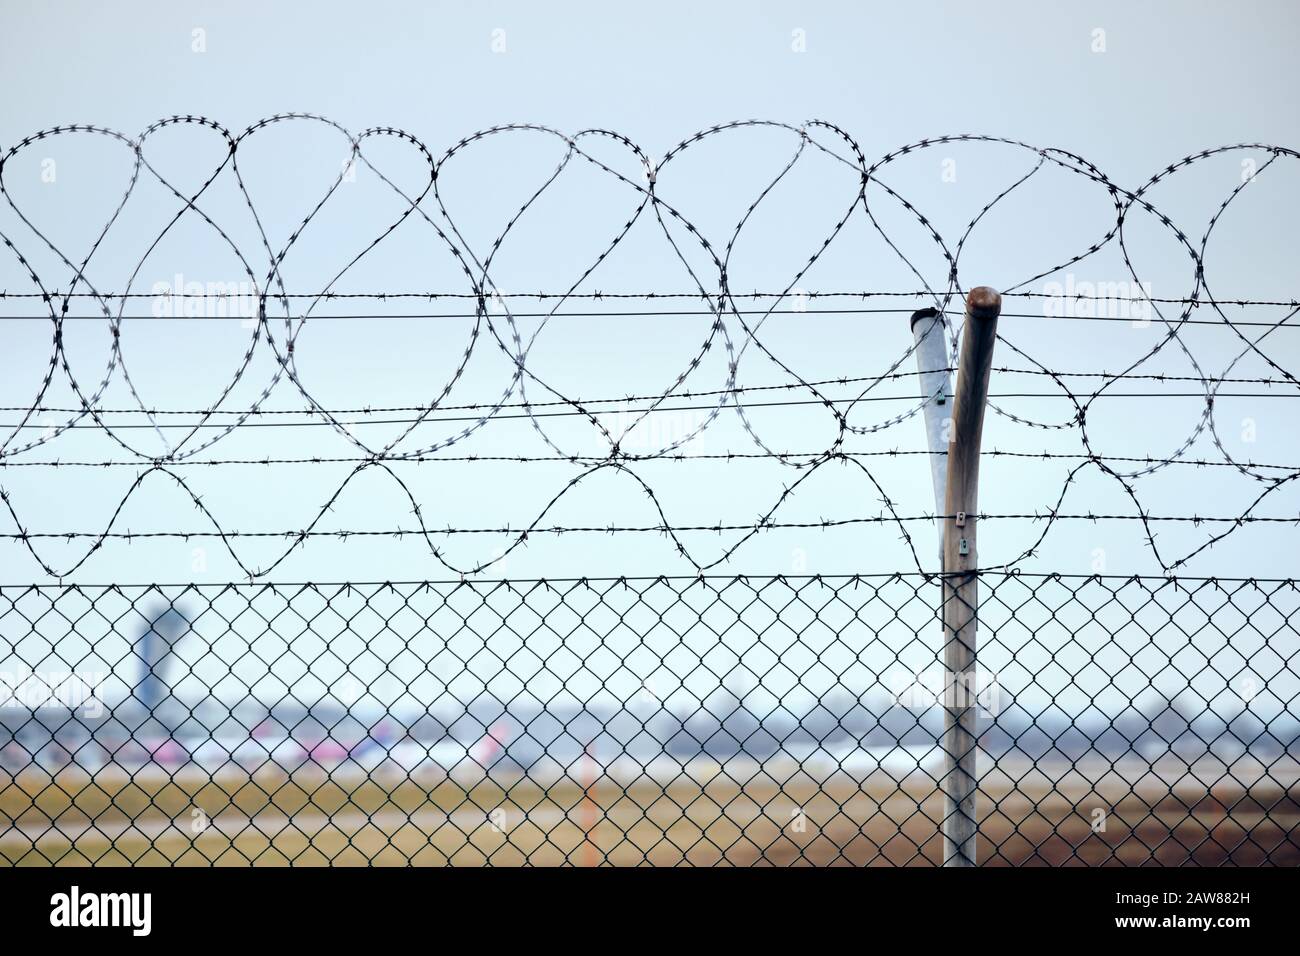 High chain-link fence with razor-barbed wire at the top protecting an airport. Stock Photo